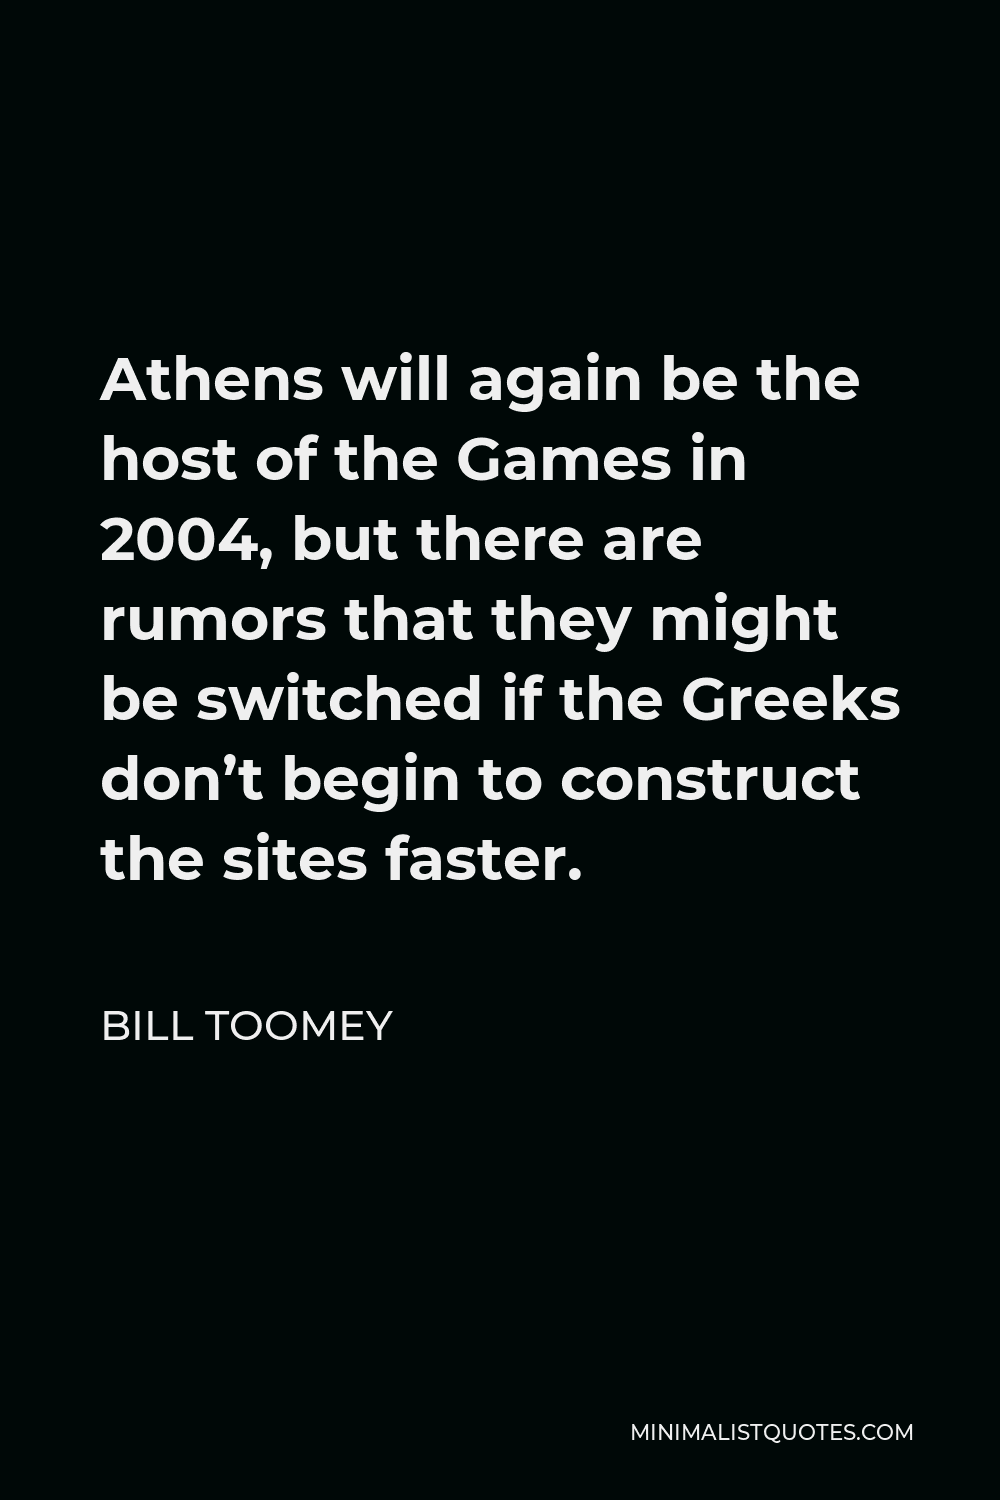 Bill Toomey Quote - Athens will again be the host of the Games in 2004, but there are rumors that they might be switched if the Greeks don’t begin to construct the sites faster.